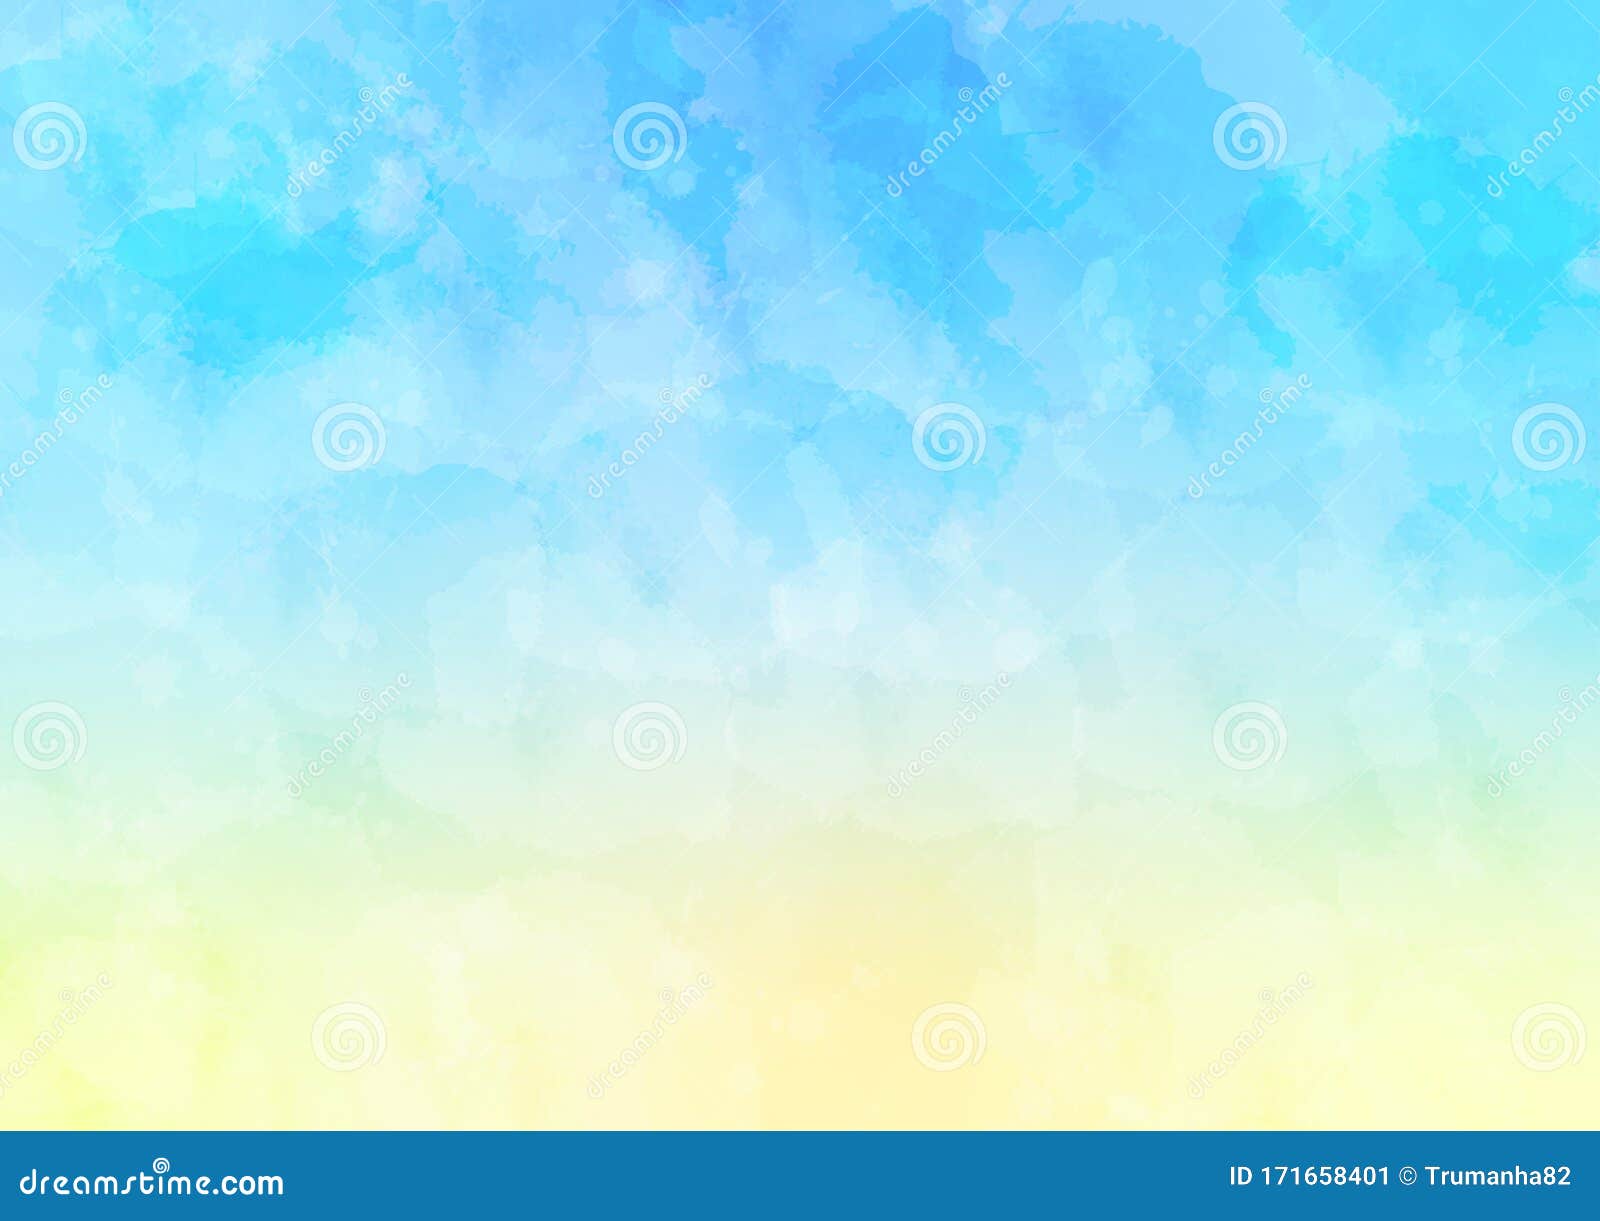  abstract pastel blue and yellow watercolor pattern background